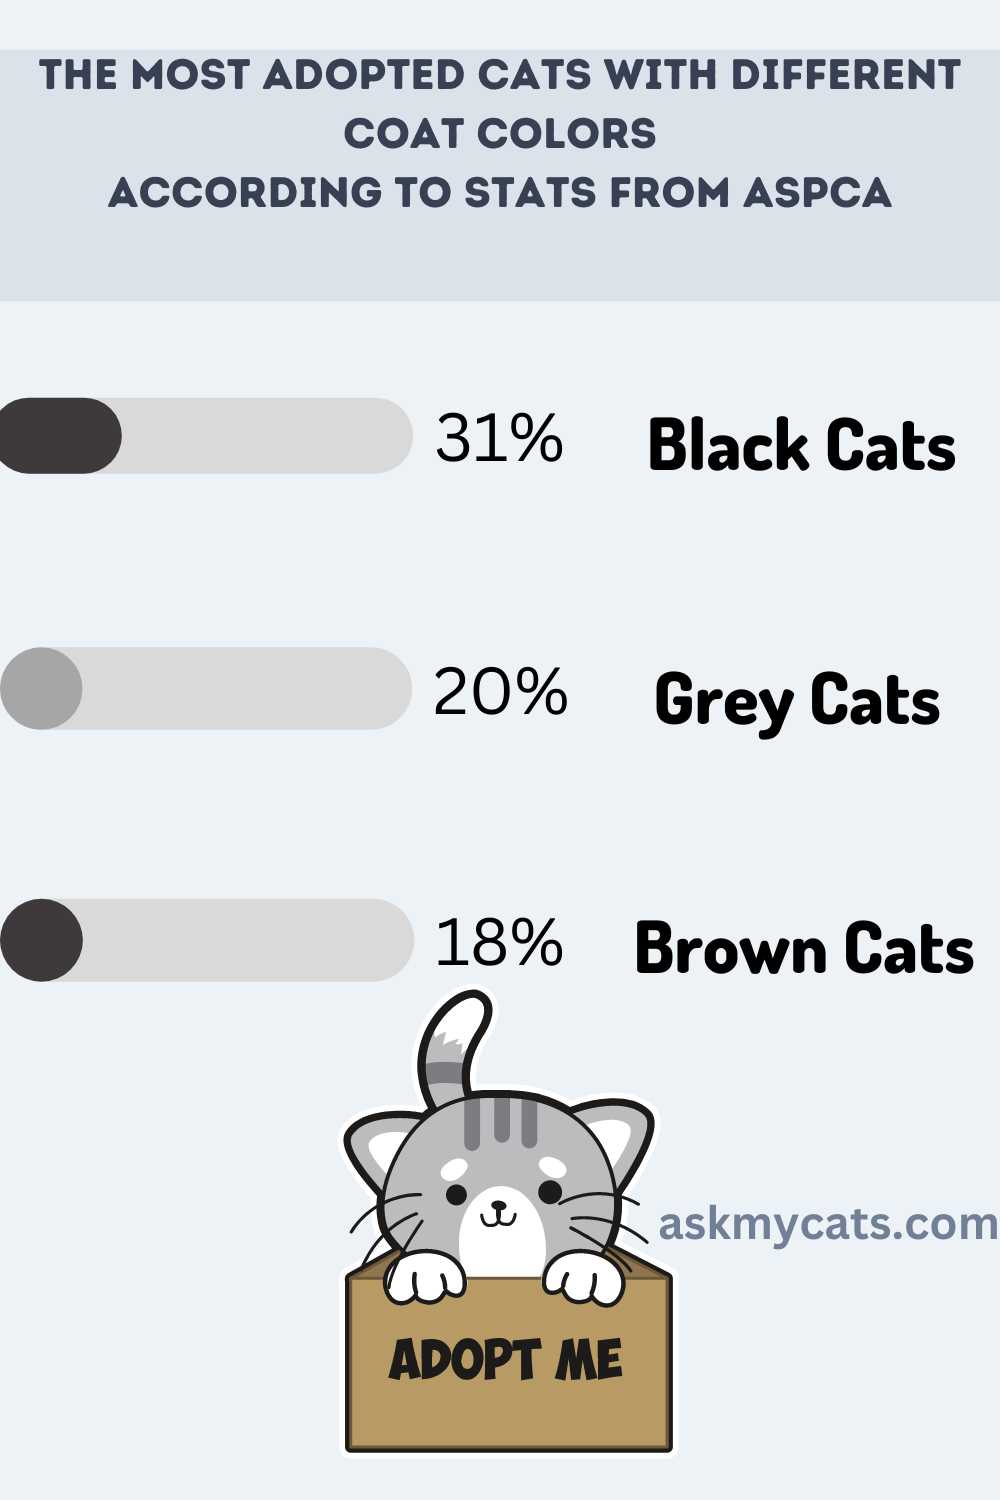 Statistics On The Number Of Black Cats In Shelters And Homes (Infographic)